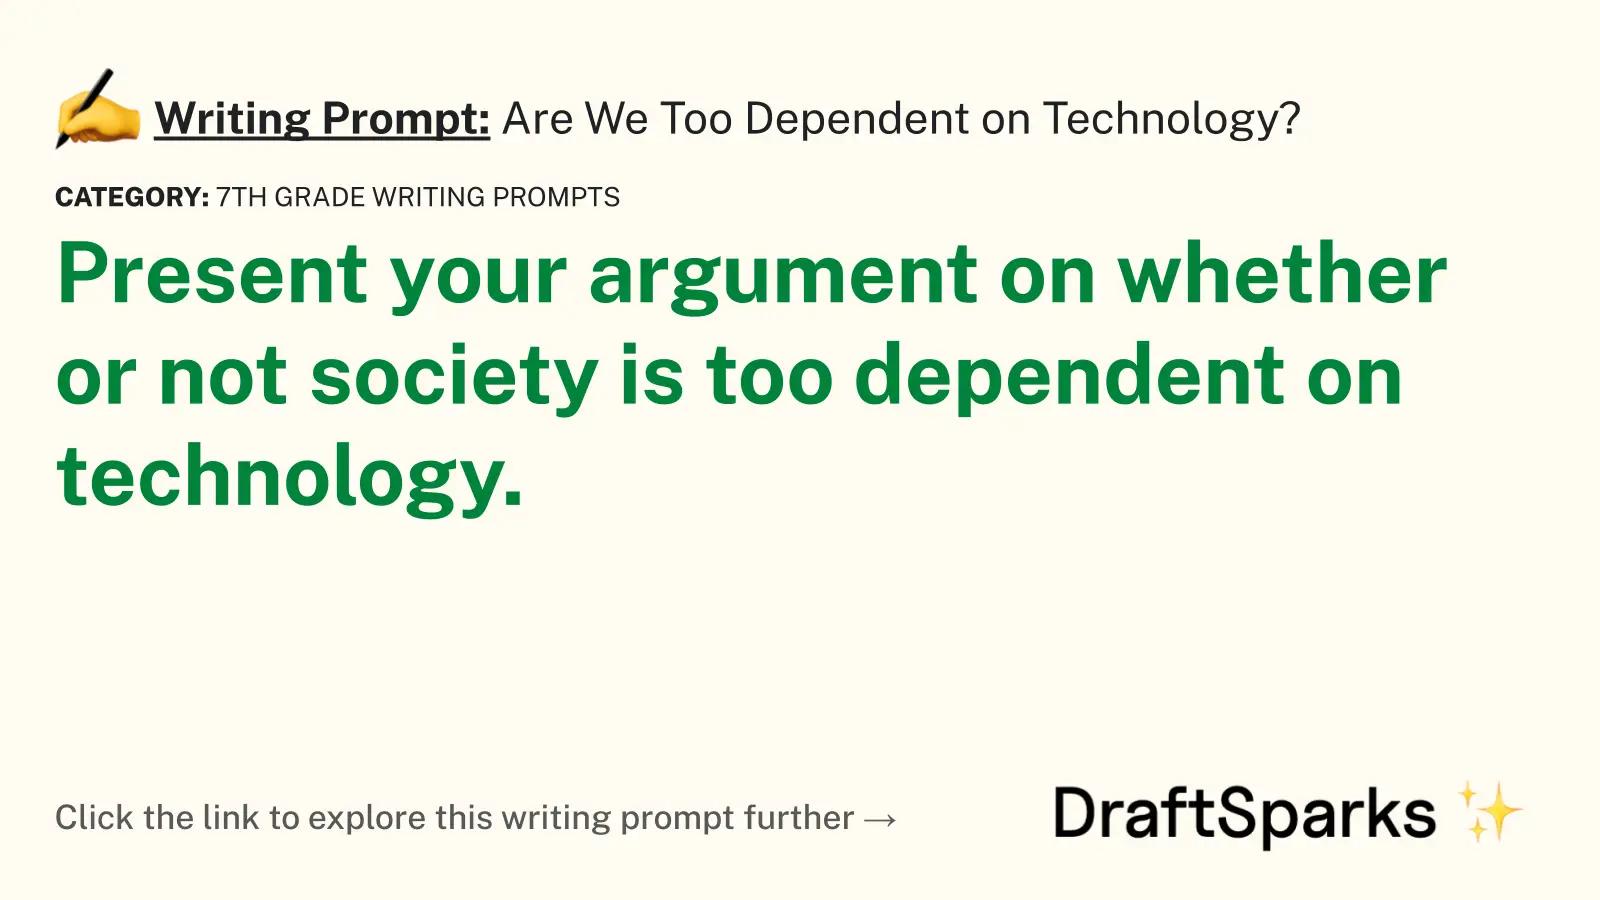 Are We Too Dependent on Technology?